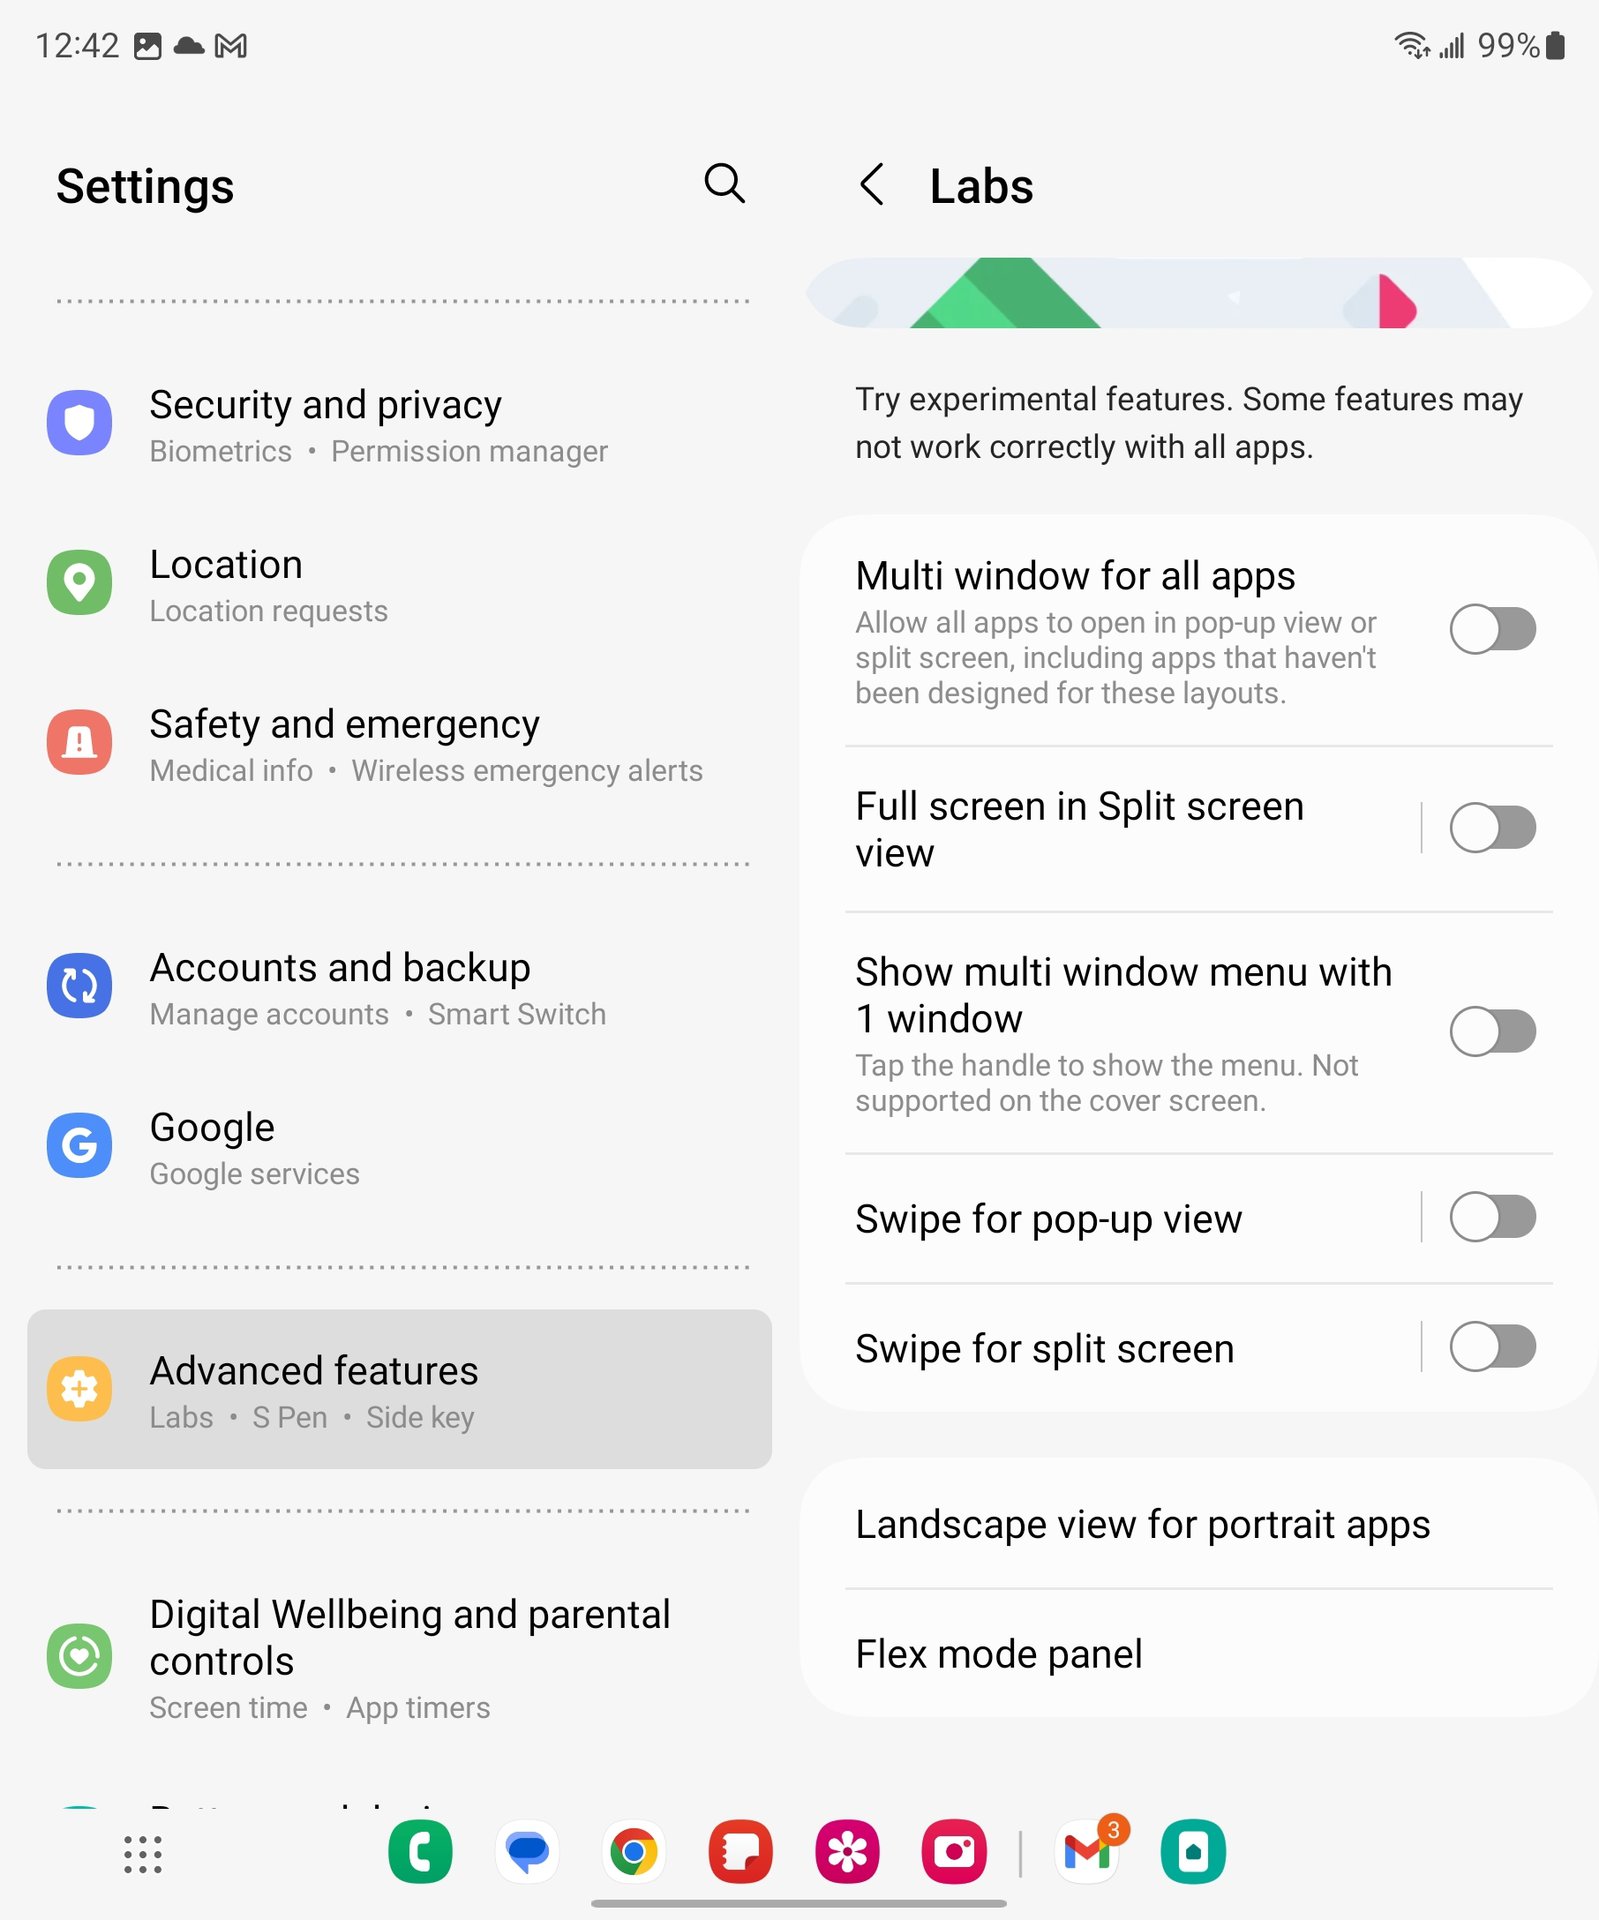 Samsung One UI Labs features 3